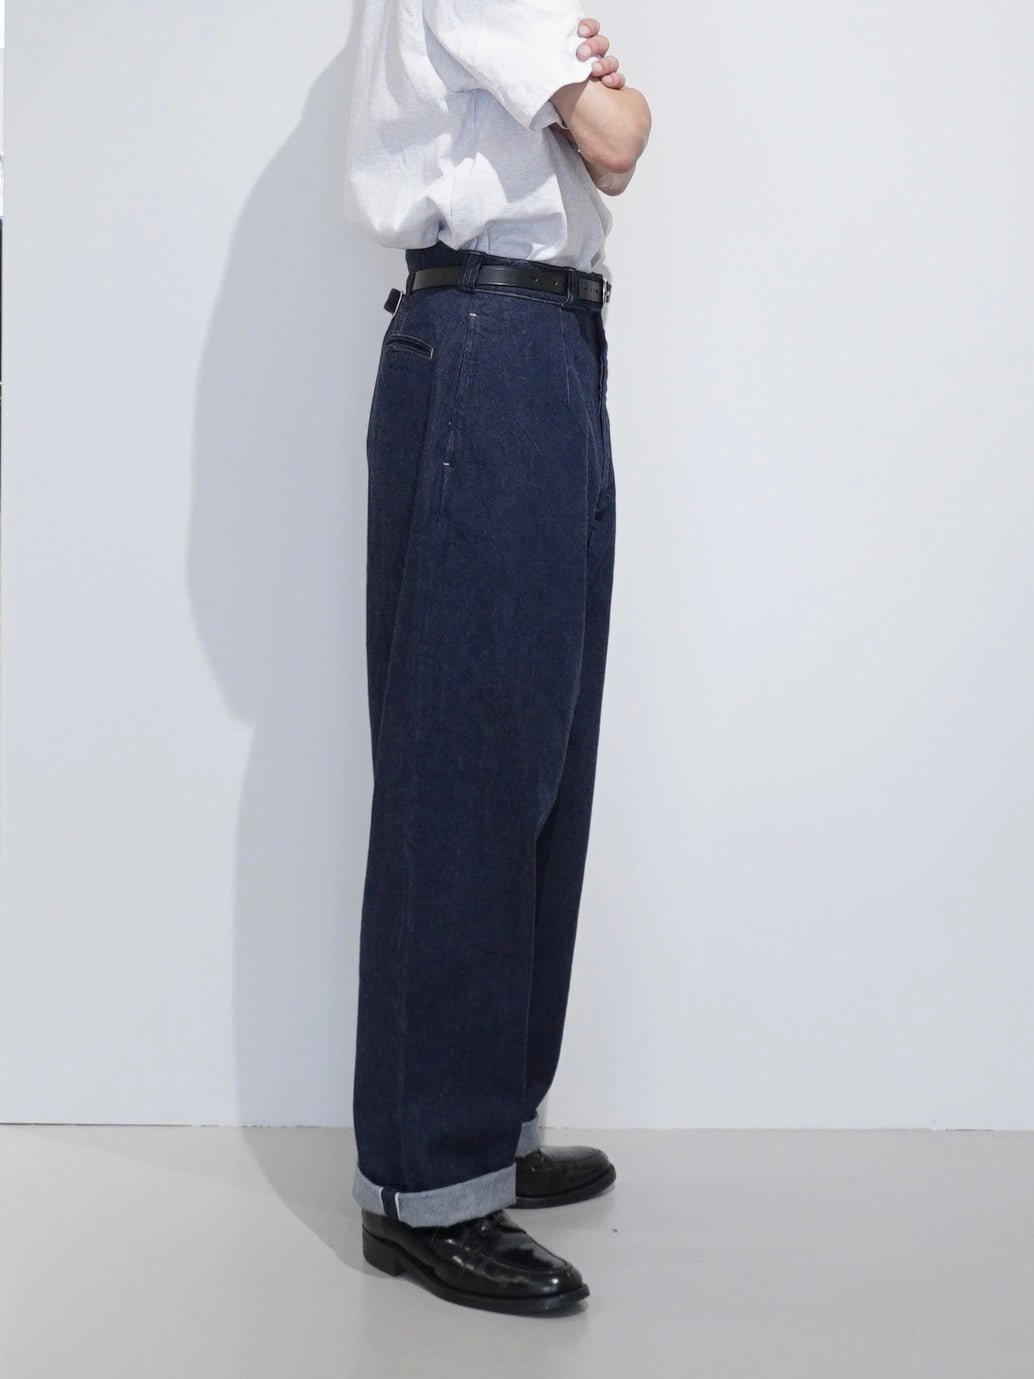 LENO] BUCKLE BACK TROUSERS リノ バックルバック トラウザー 